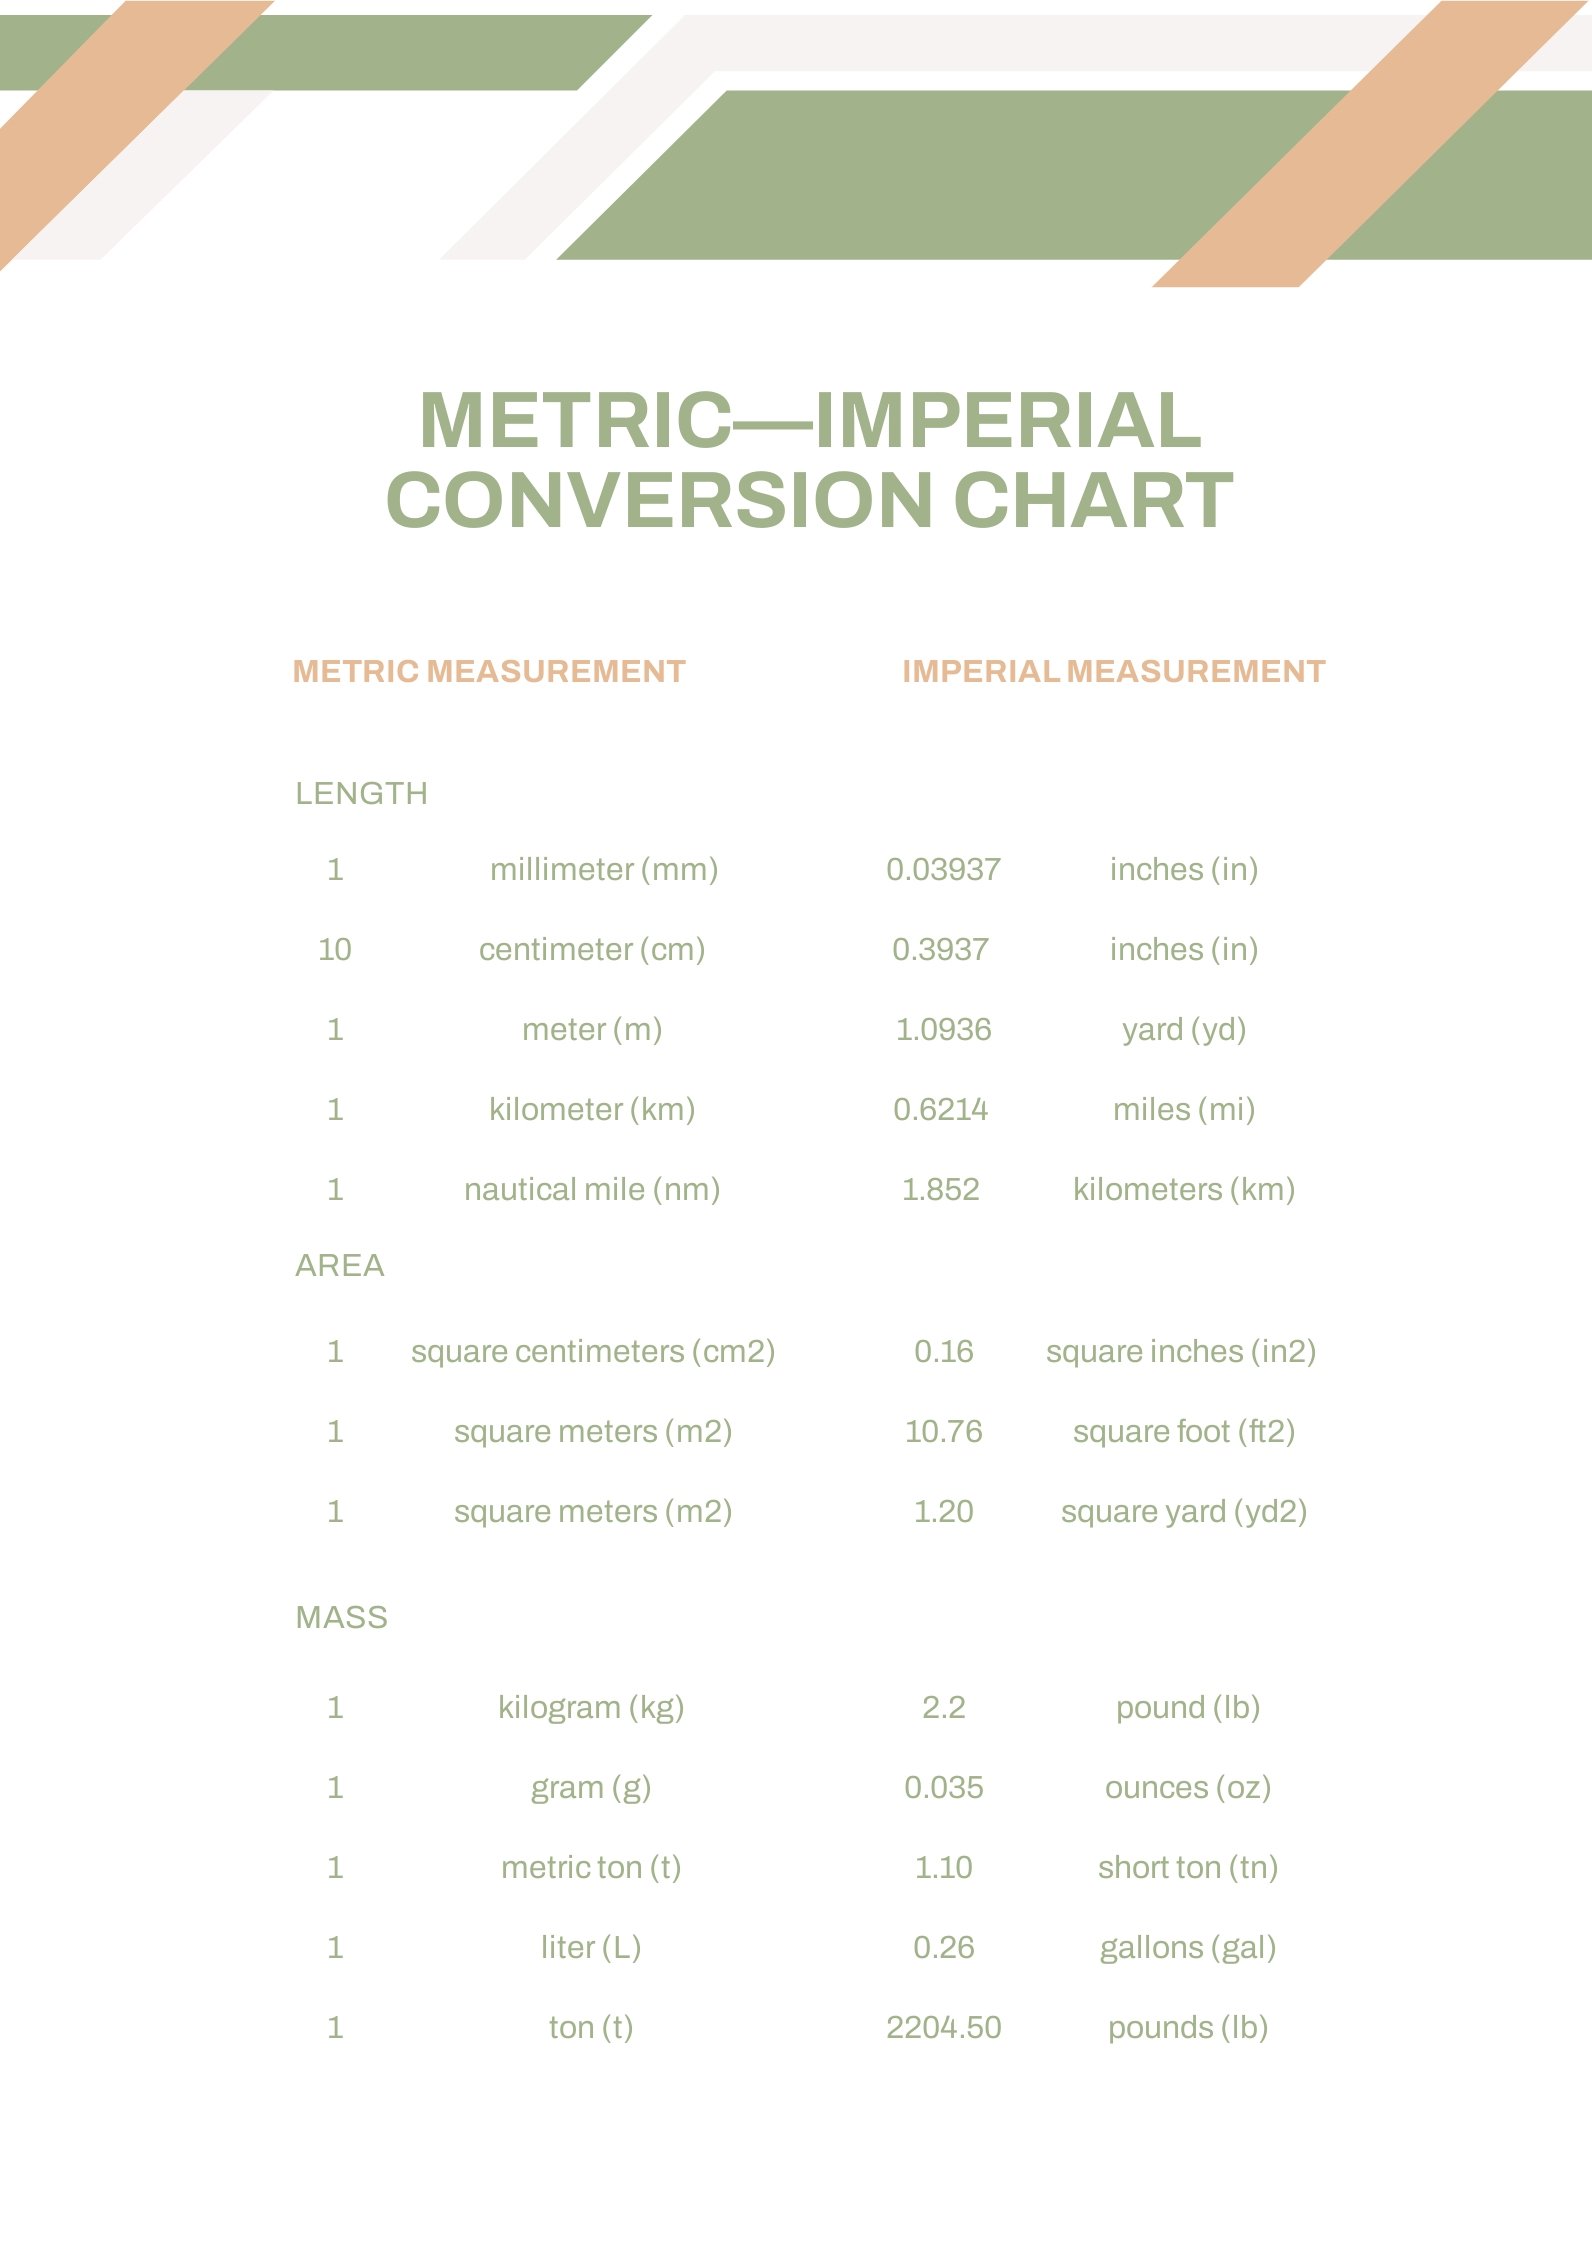 Metric to Imperial Conversion Chart